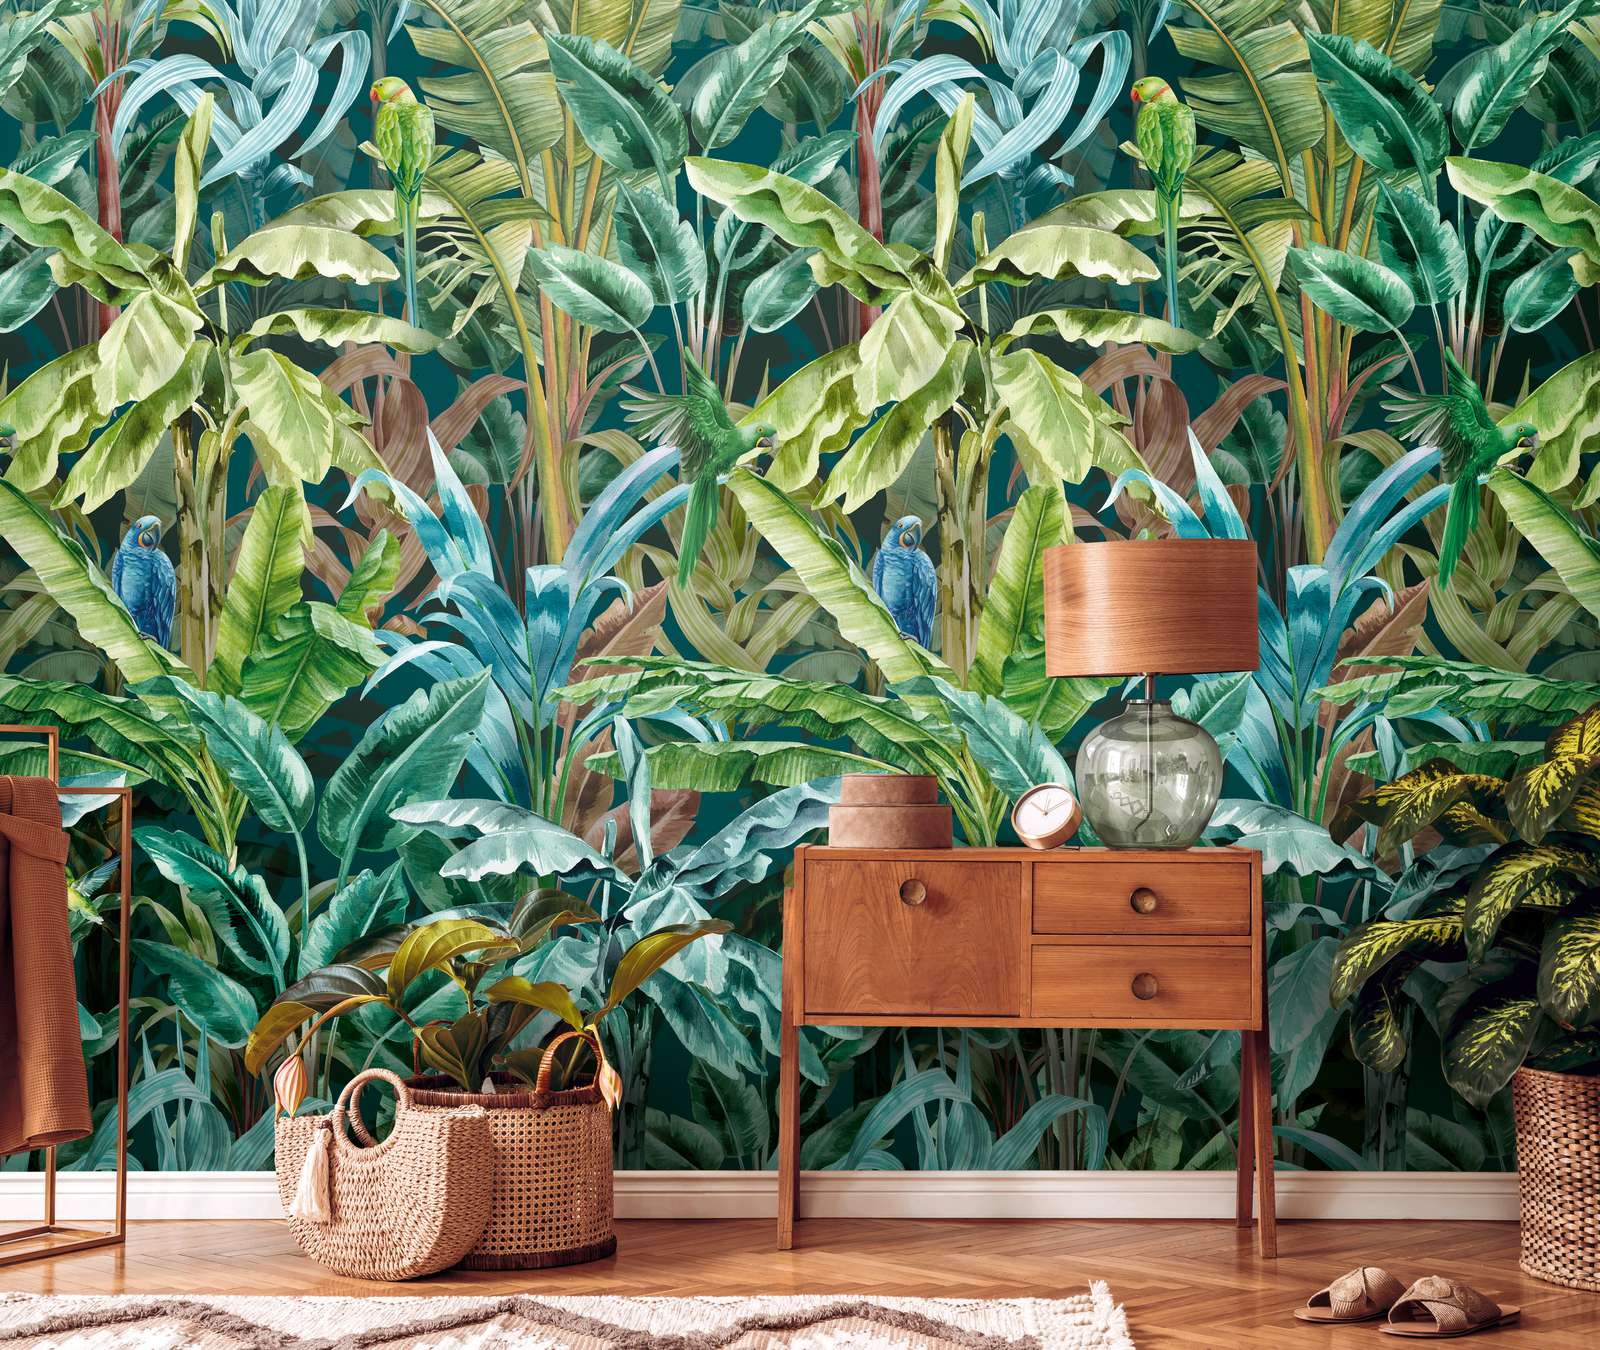             Non-woven wallpaper with gaudy jungle pattern - green, blue, brown
        